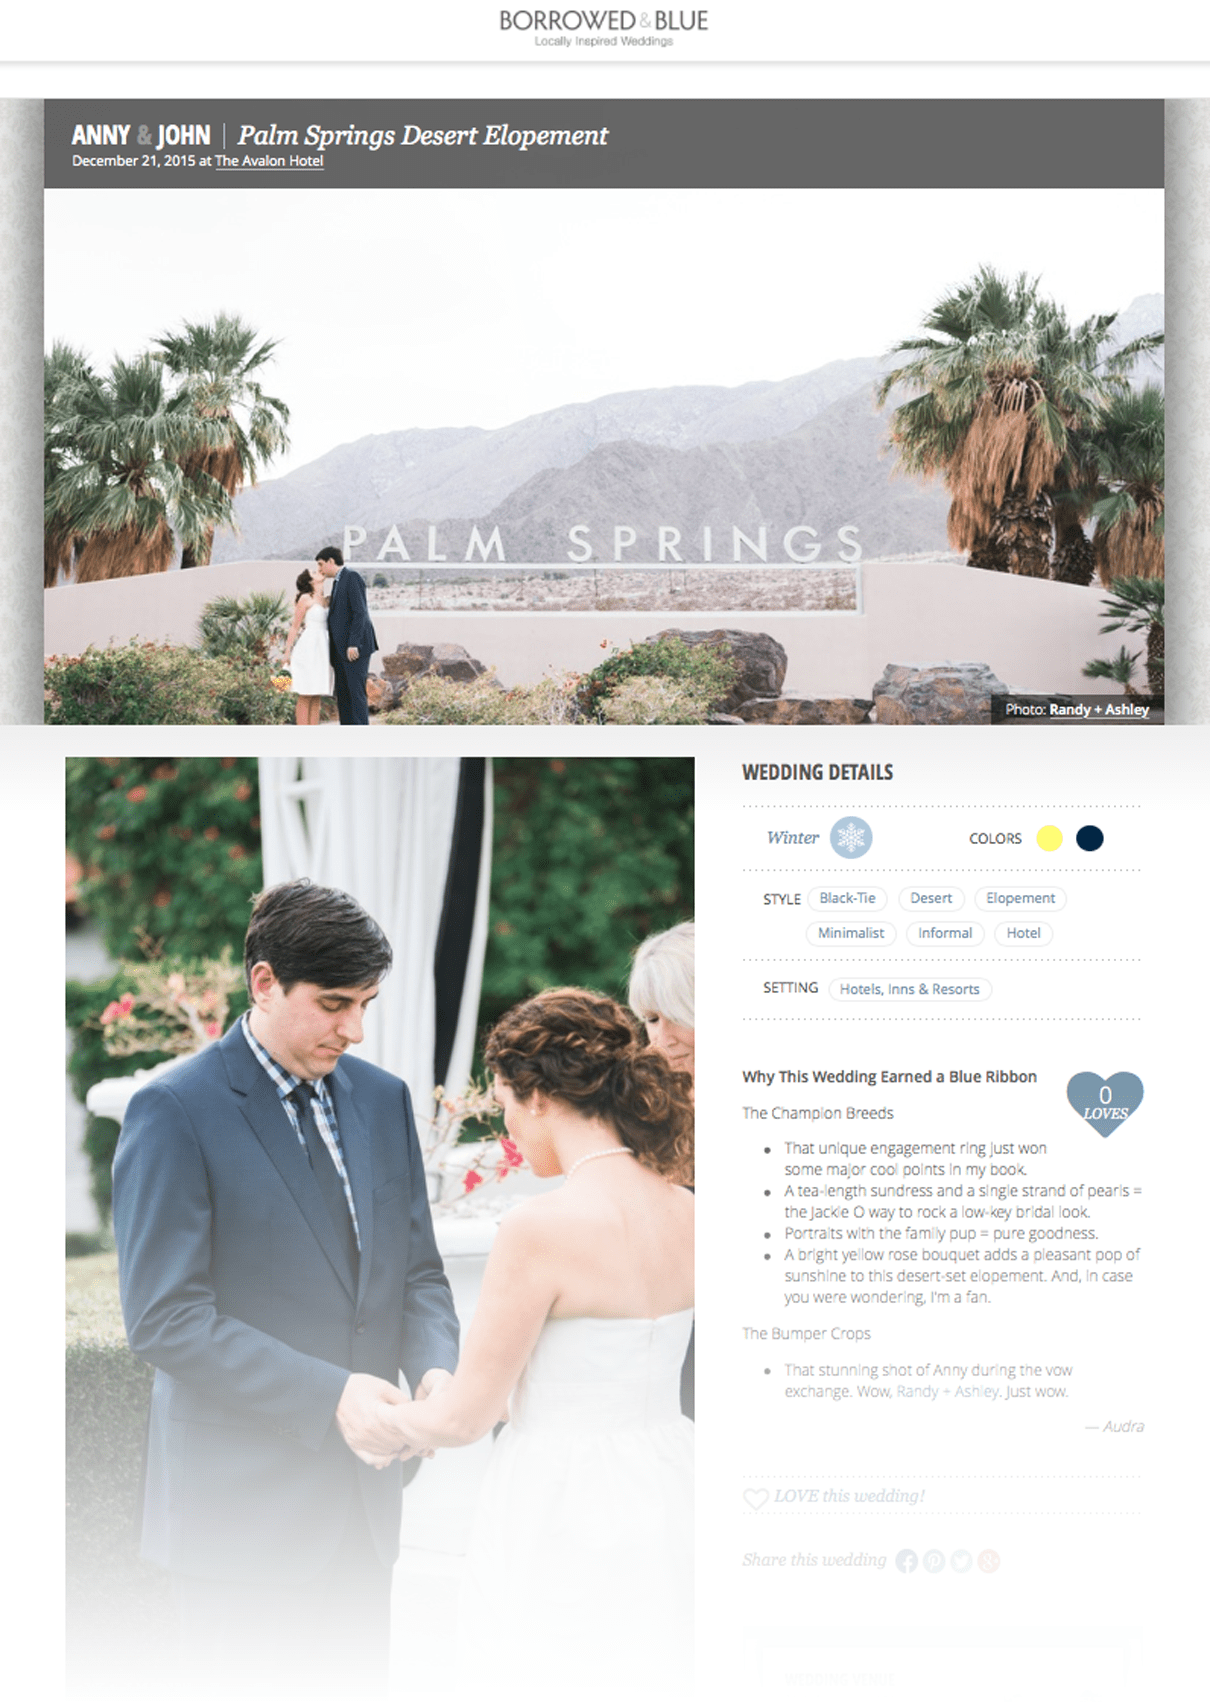 featured on borrowed and blue, palm springs wedding, avalon hotel wedding, palm springs elopement